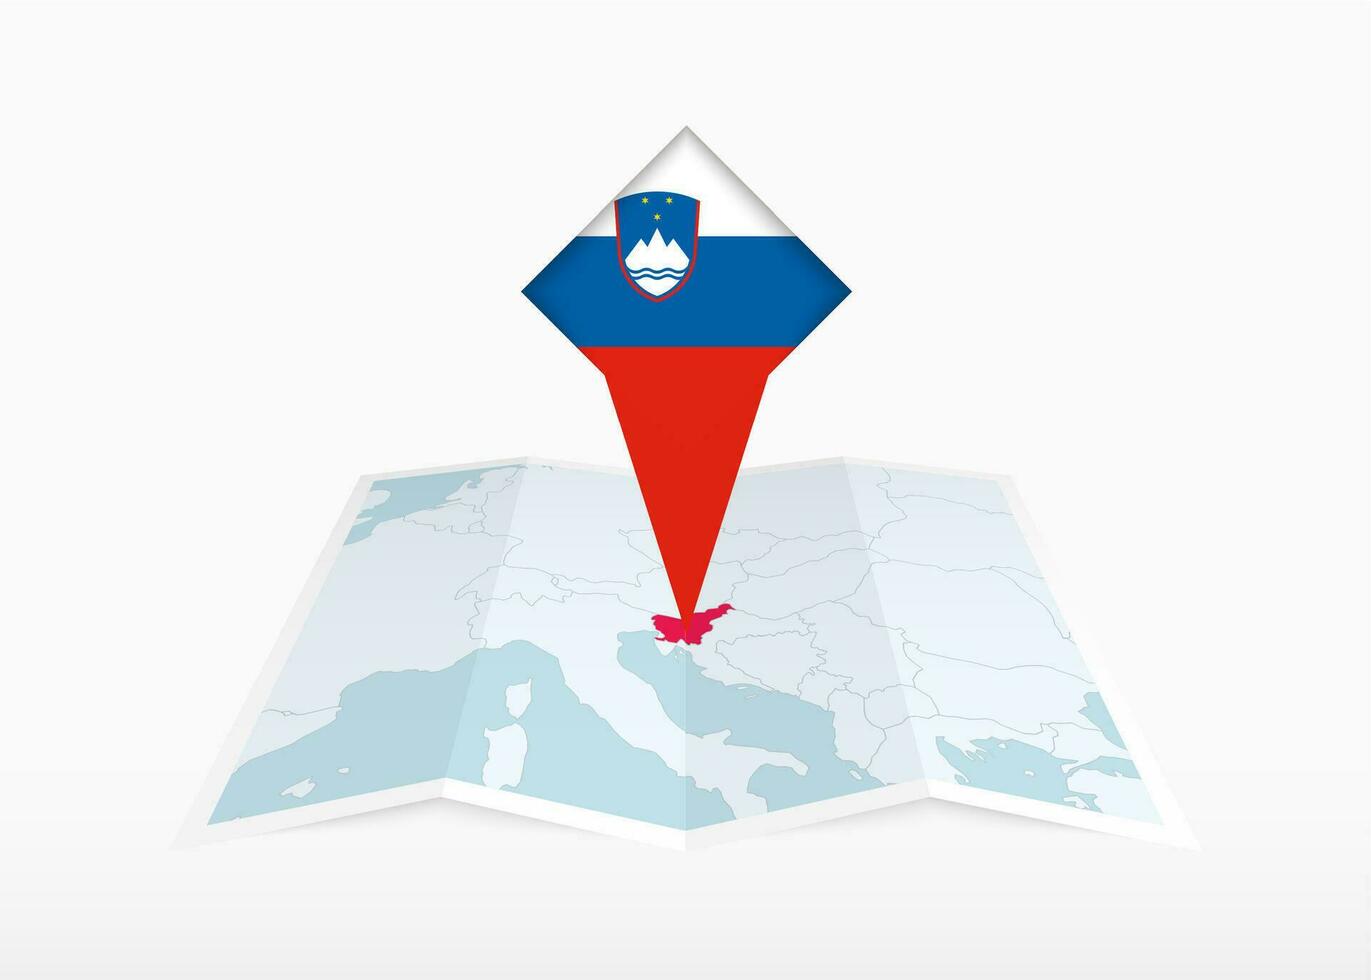 Slovenia is depicted on a folded paper map and pinned location marker with flag of Slovenia. vector